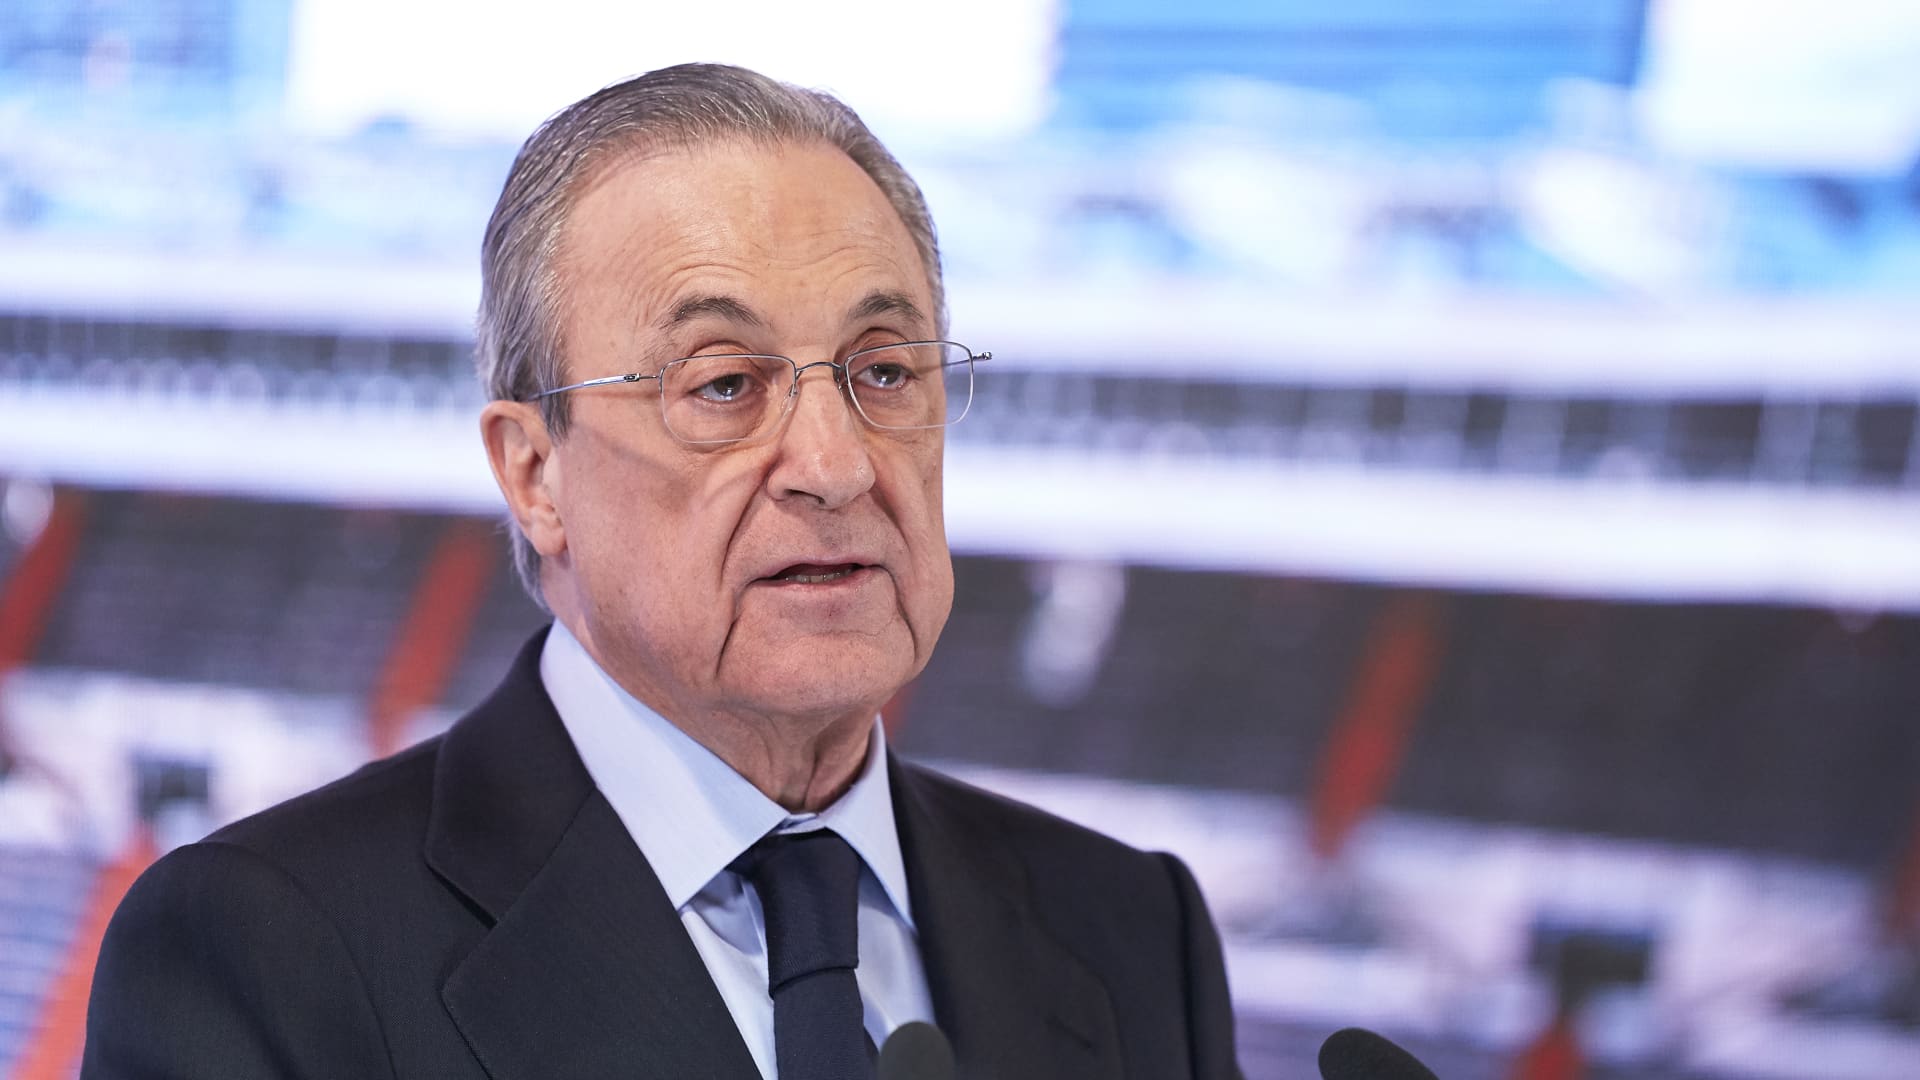 Florentino Perez, President of Real Madrid pictured on February 18, 2020 in Madrid, Spain.